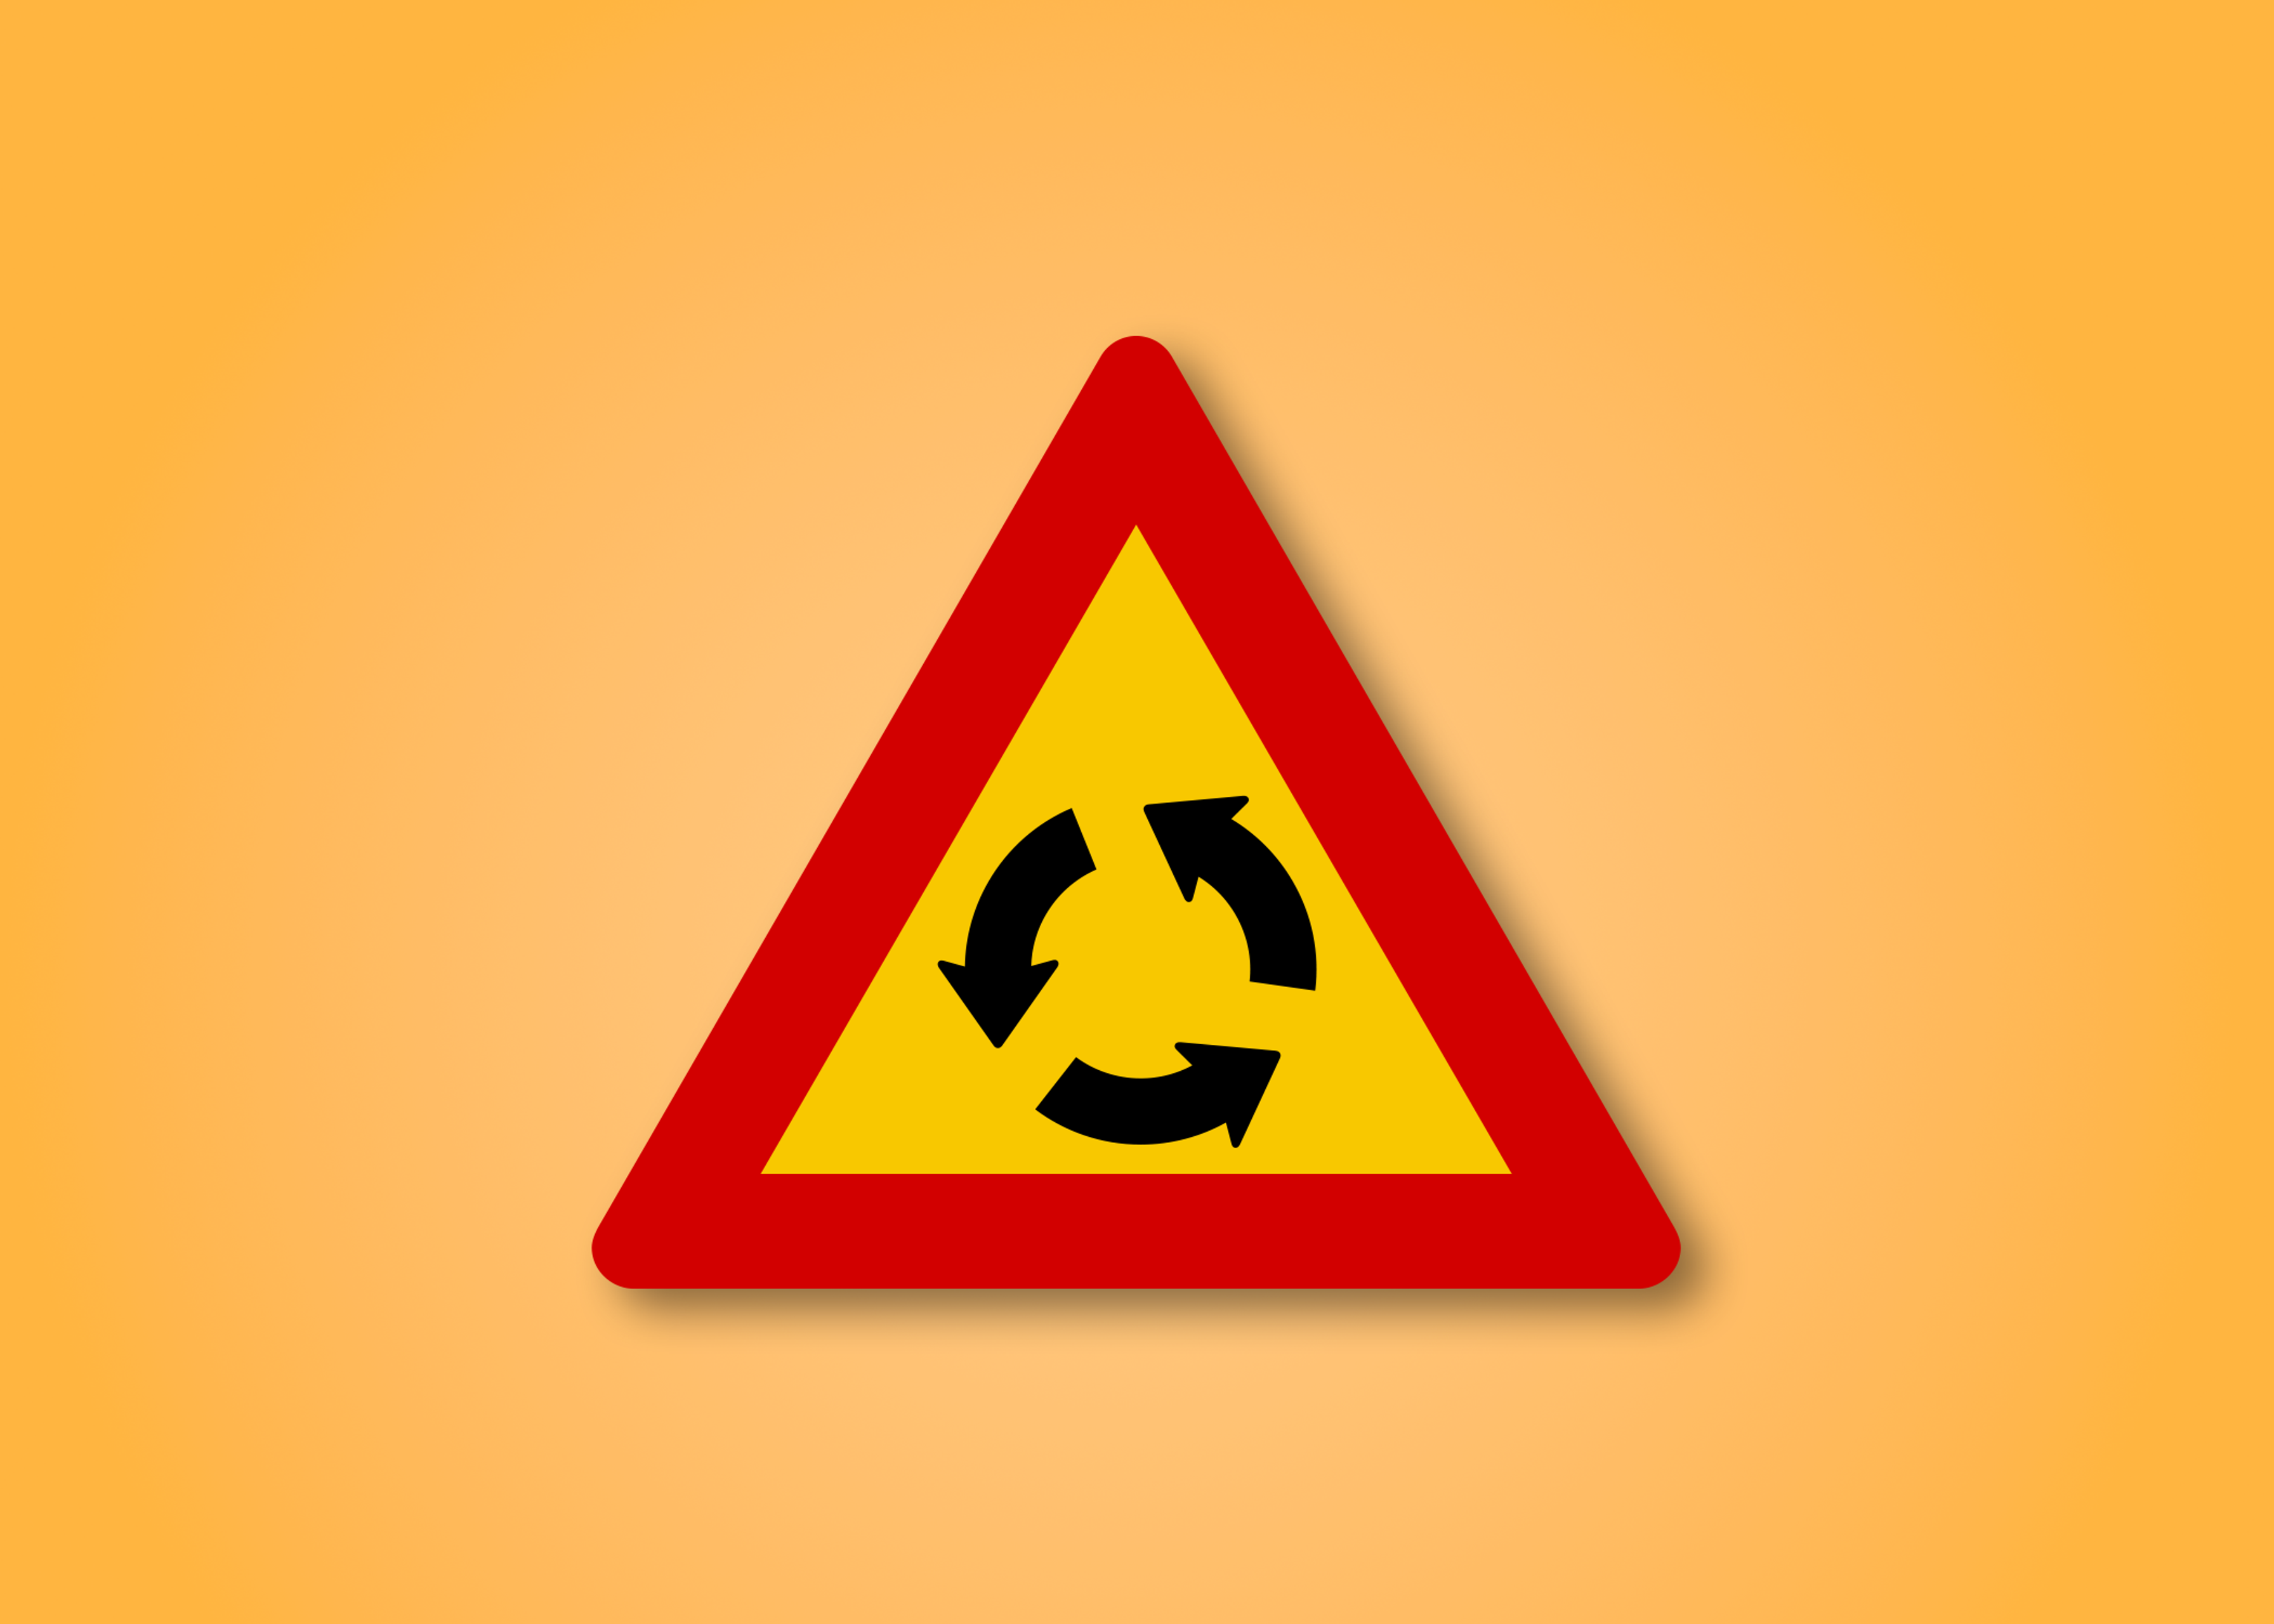 Red and yellow triangle road sign with an Roundabout in the middle. This road sign means Roundabout ahead